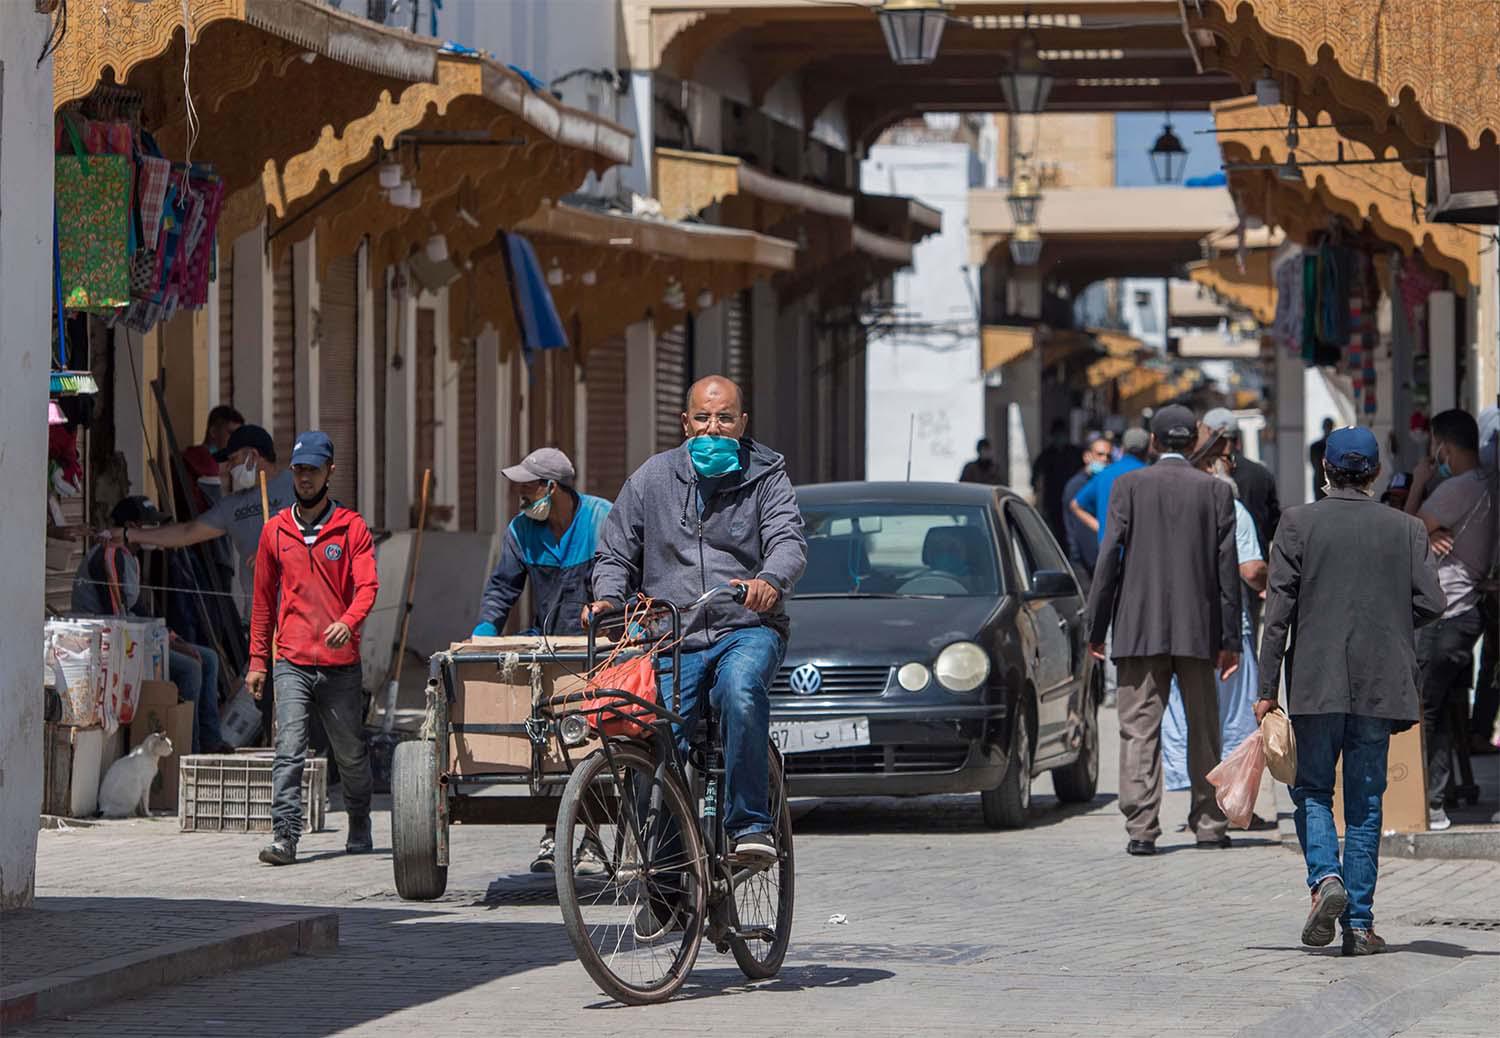 The gradual lifting of the lockdown is being felt across Morocco